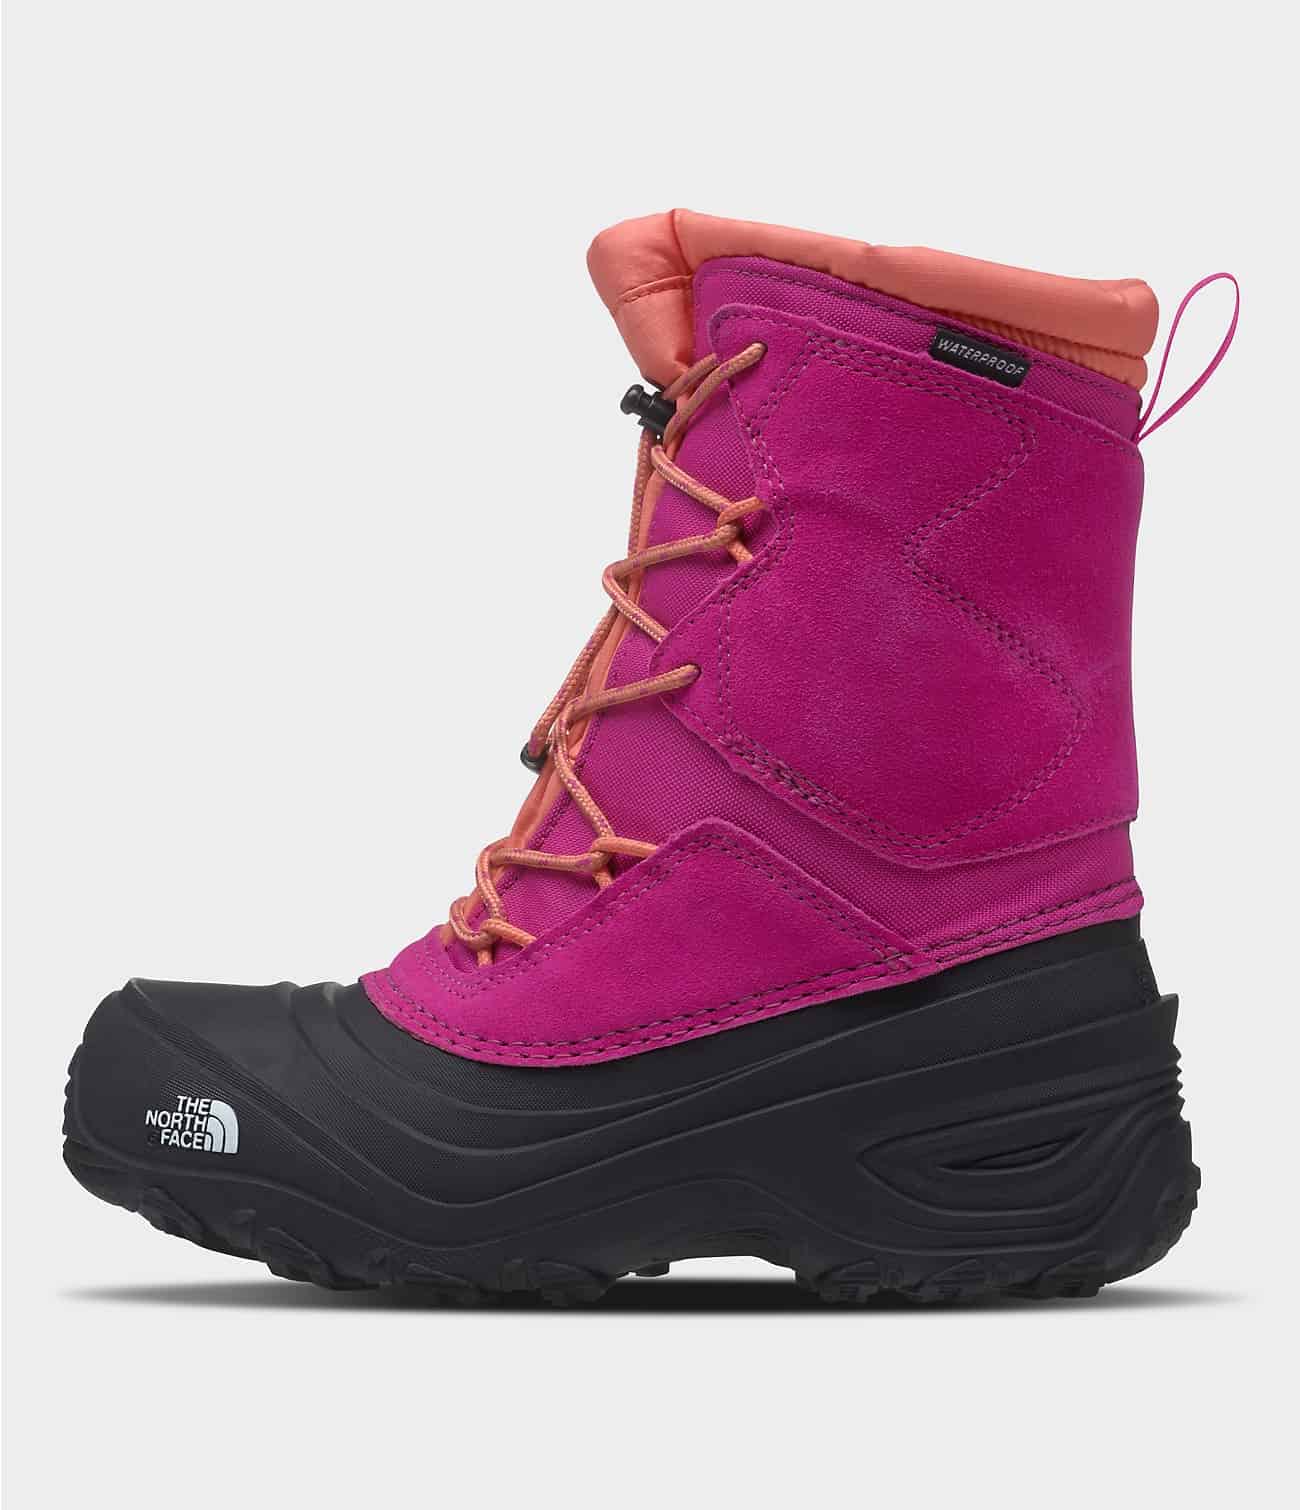 Prairie Summit Shop - The North Face Youth Alpenglow V Boot